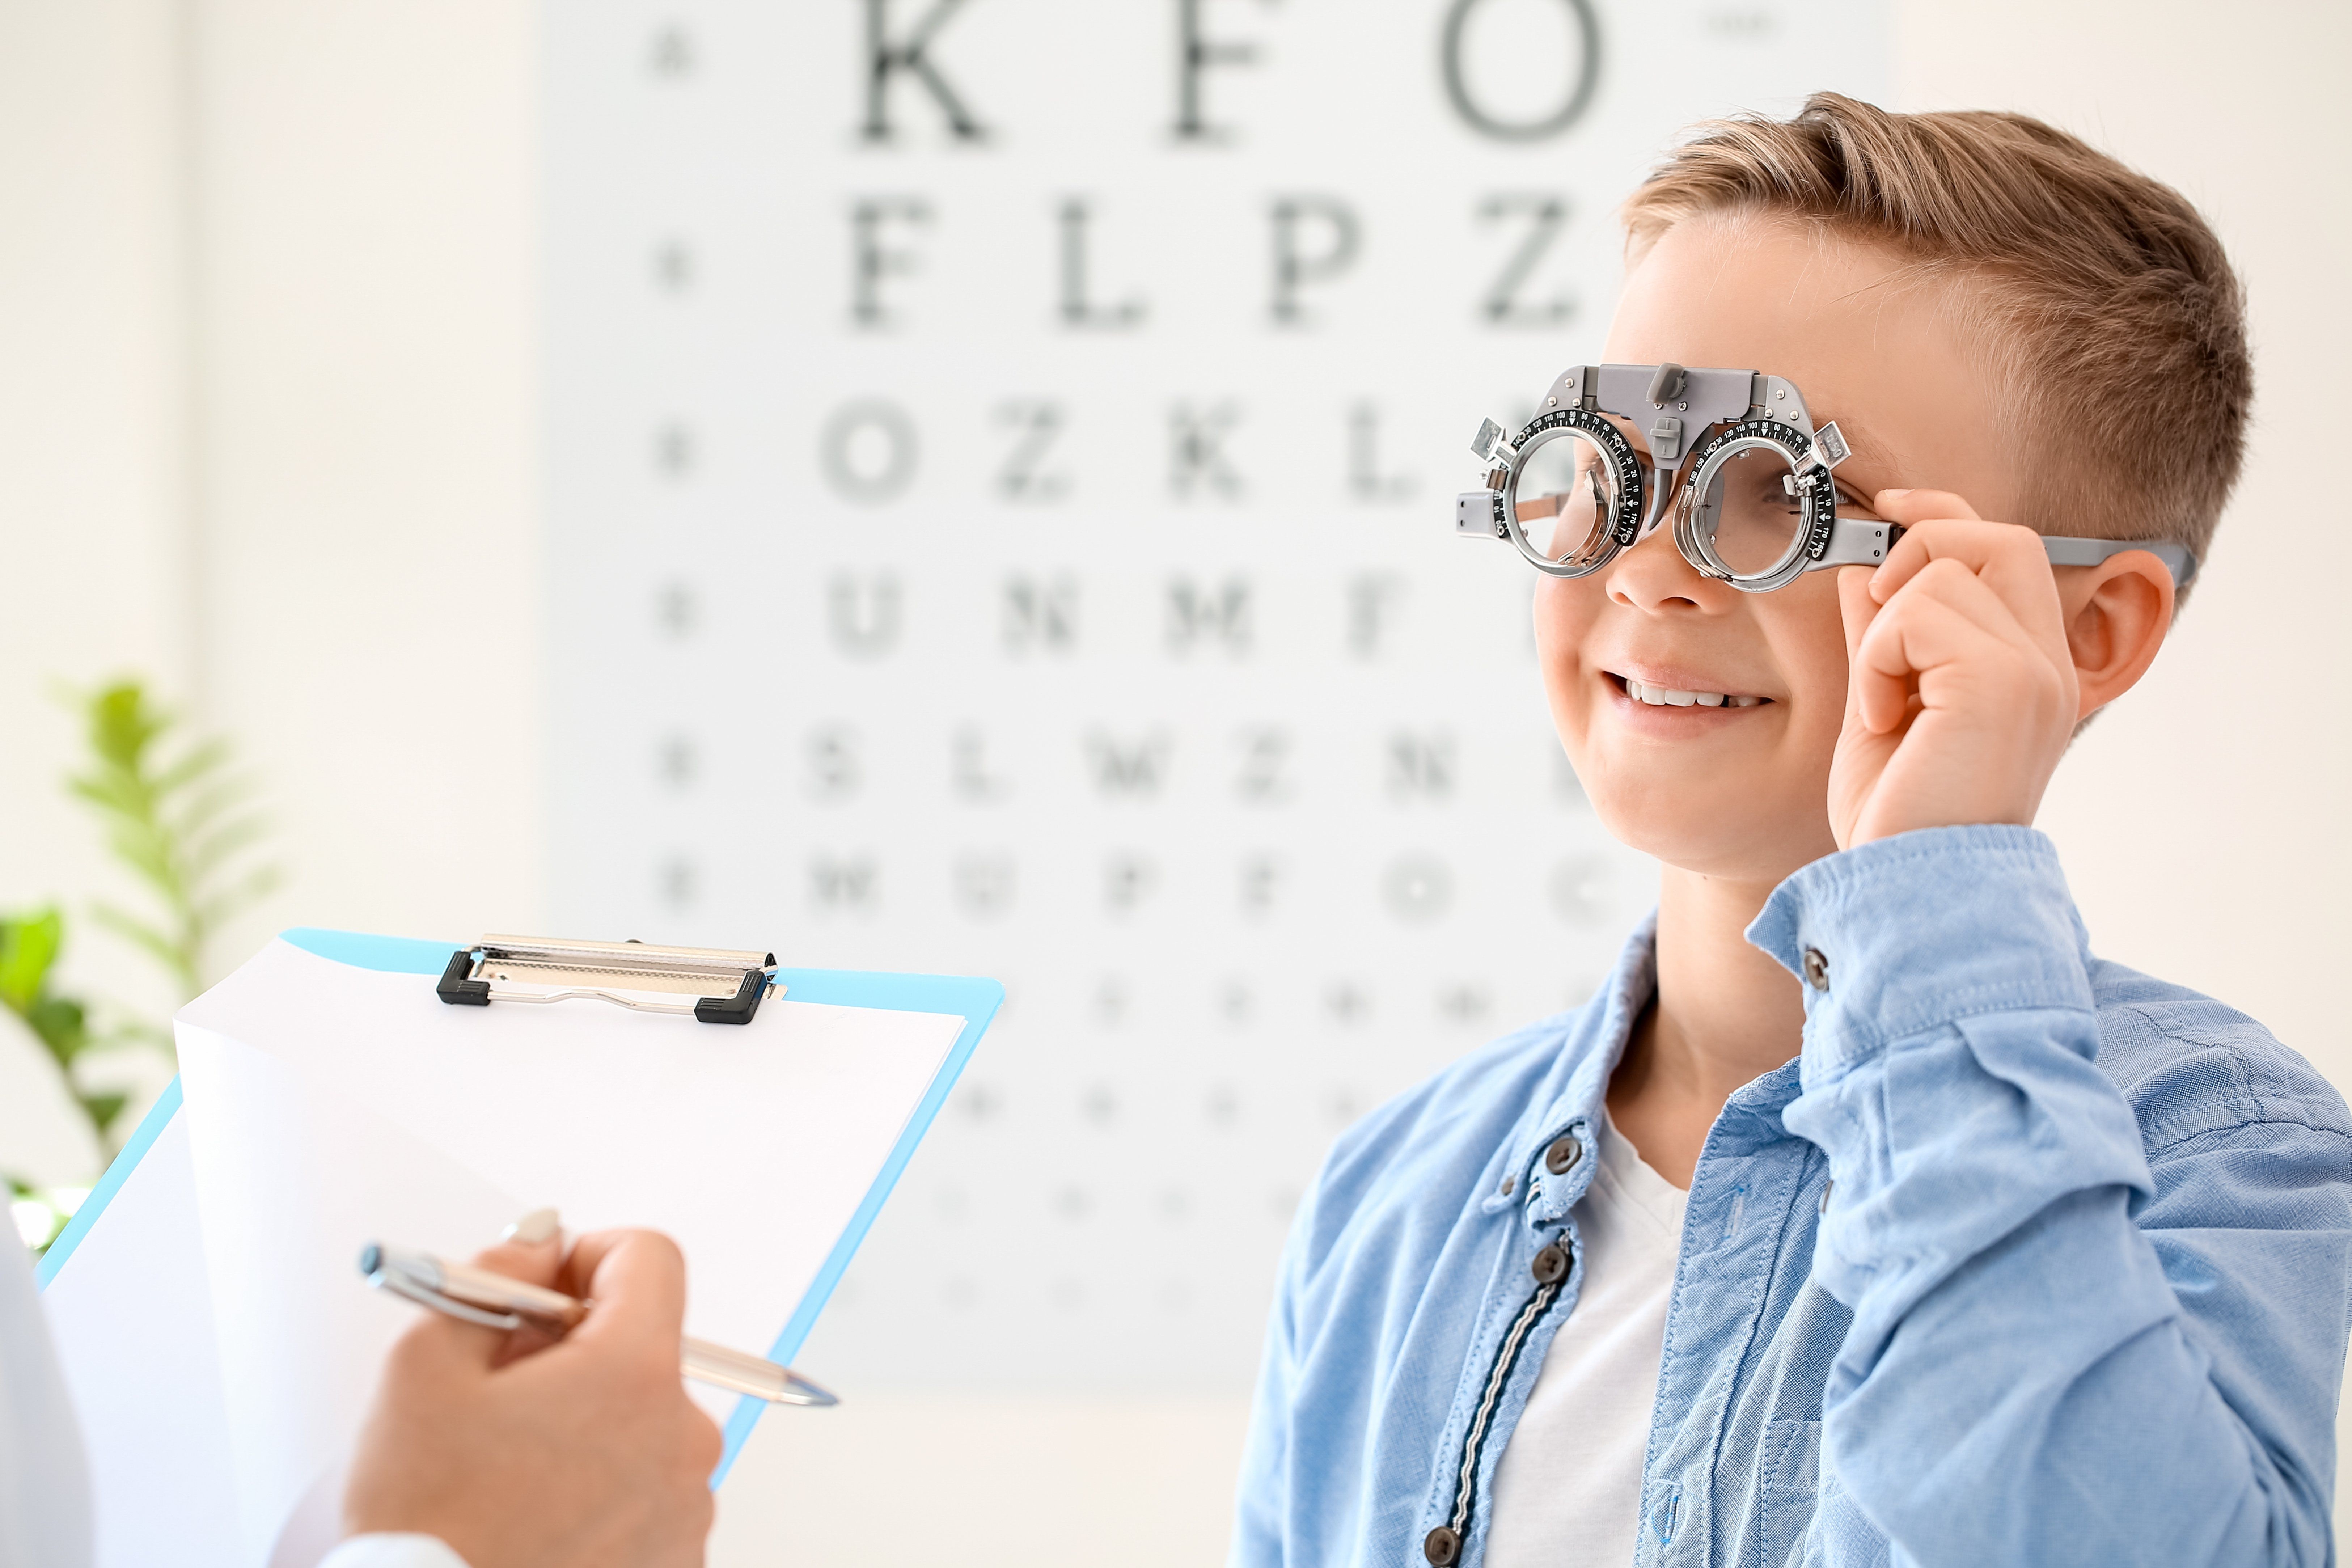 Does My Child Need an Eye Exam or a School Vision Screening?